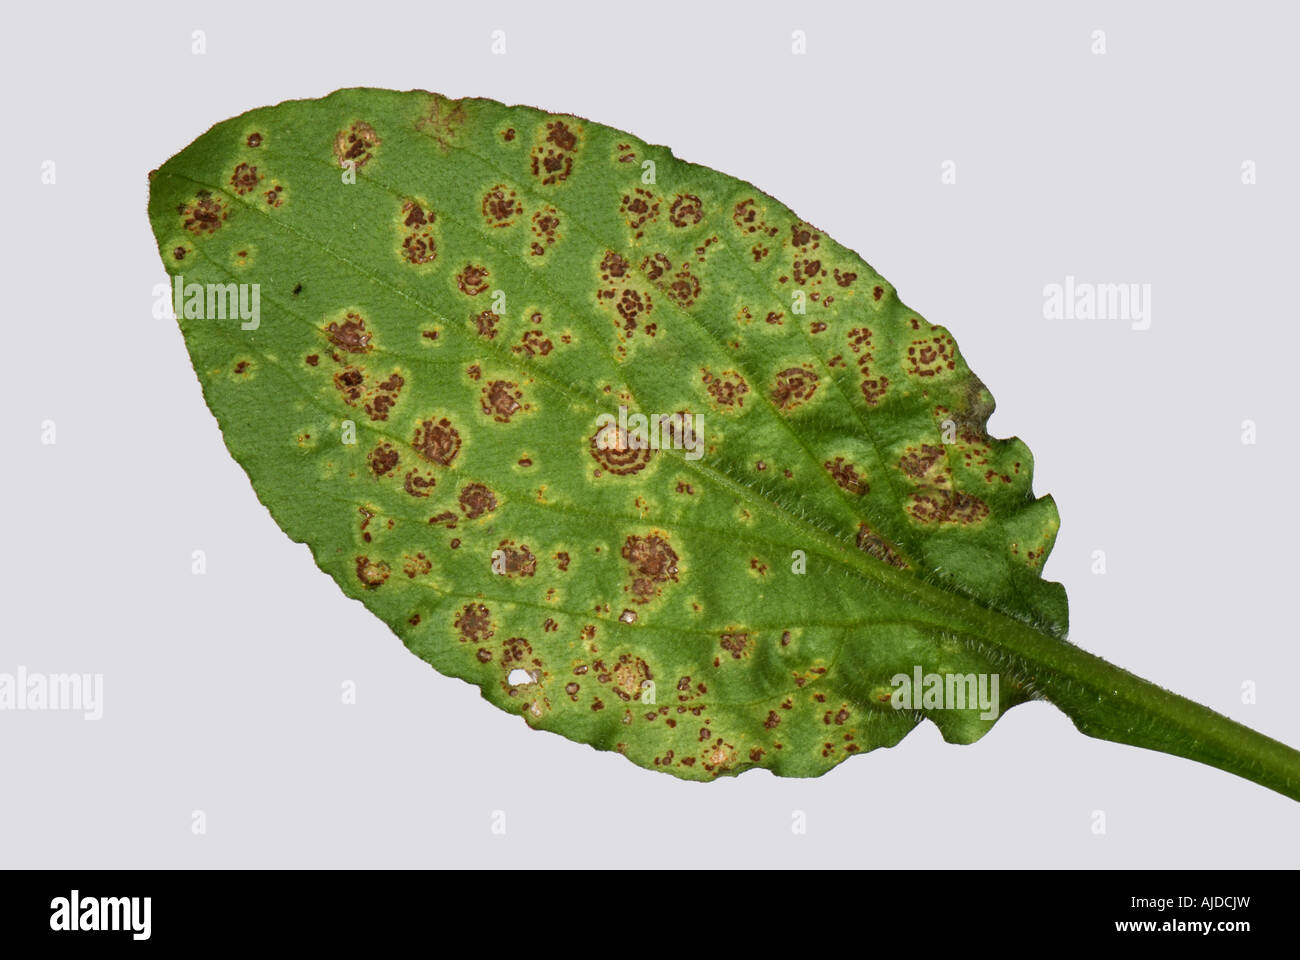 Rust Puccinia arenariae telia in concentric rings underside of a red campion Silene dioica leaf Stock Photo